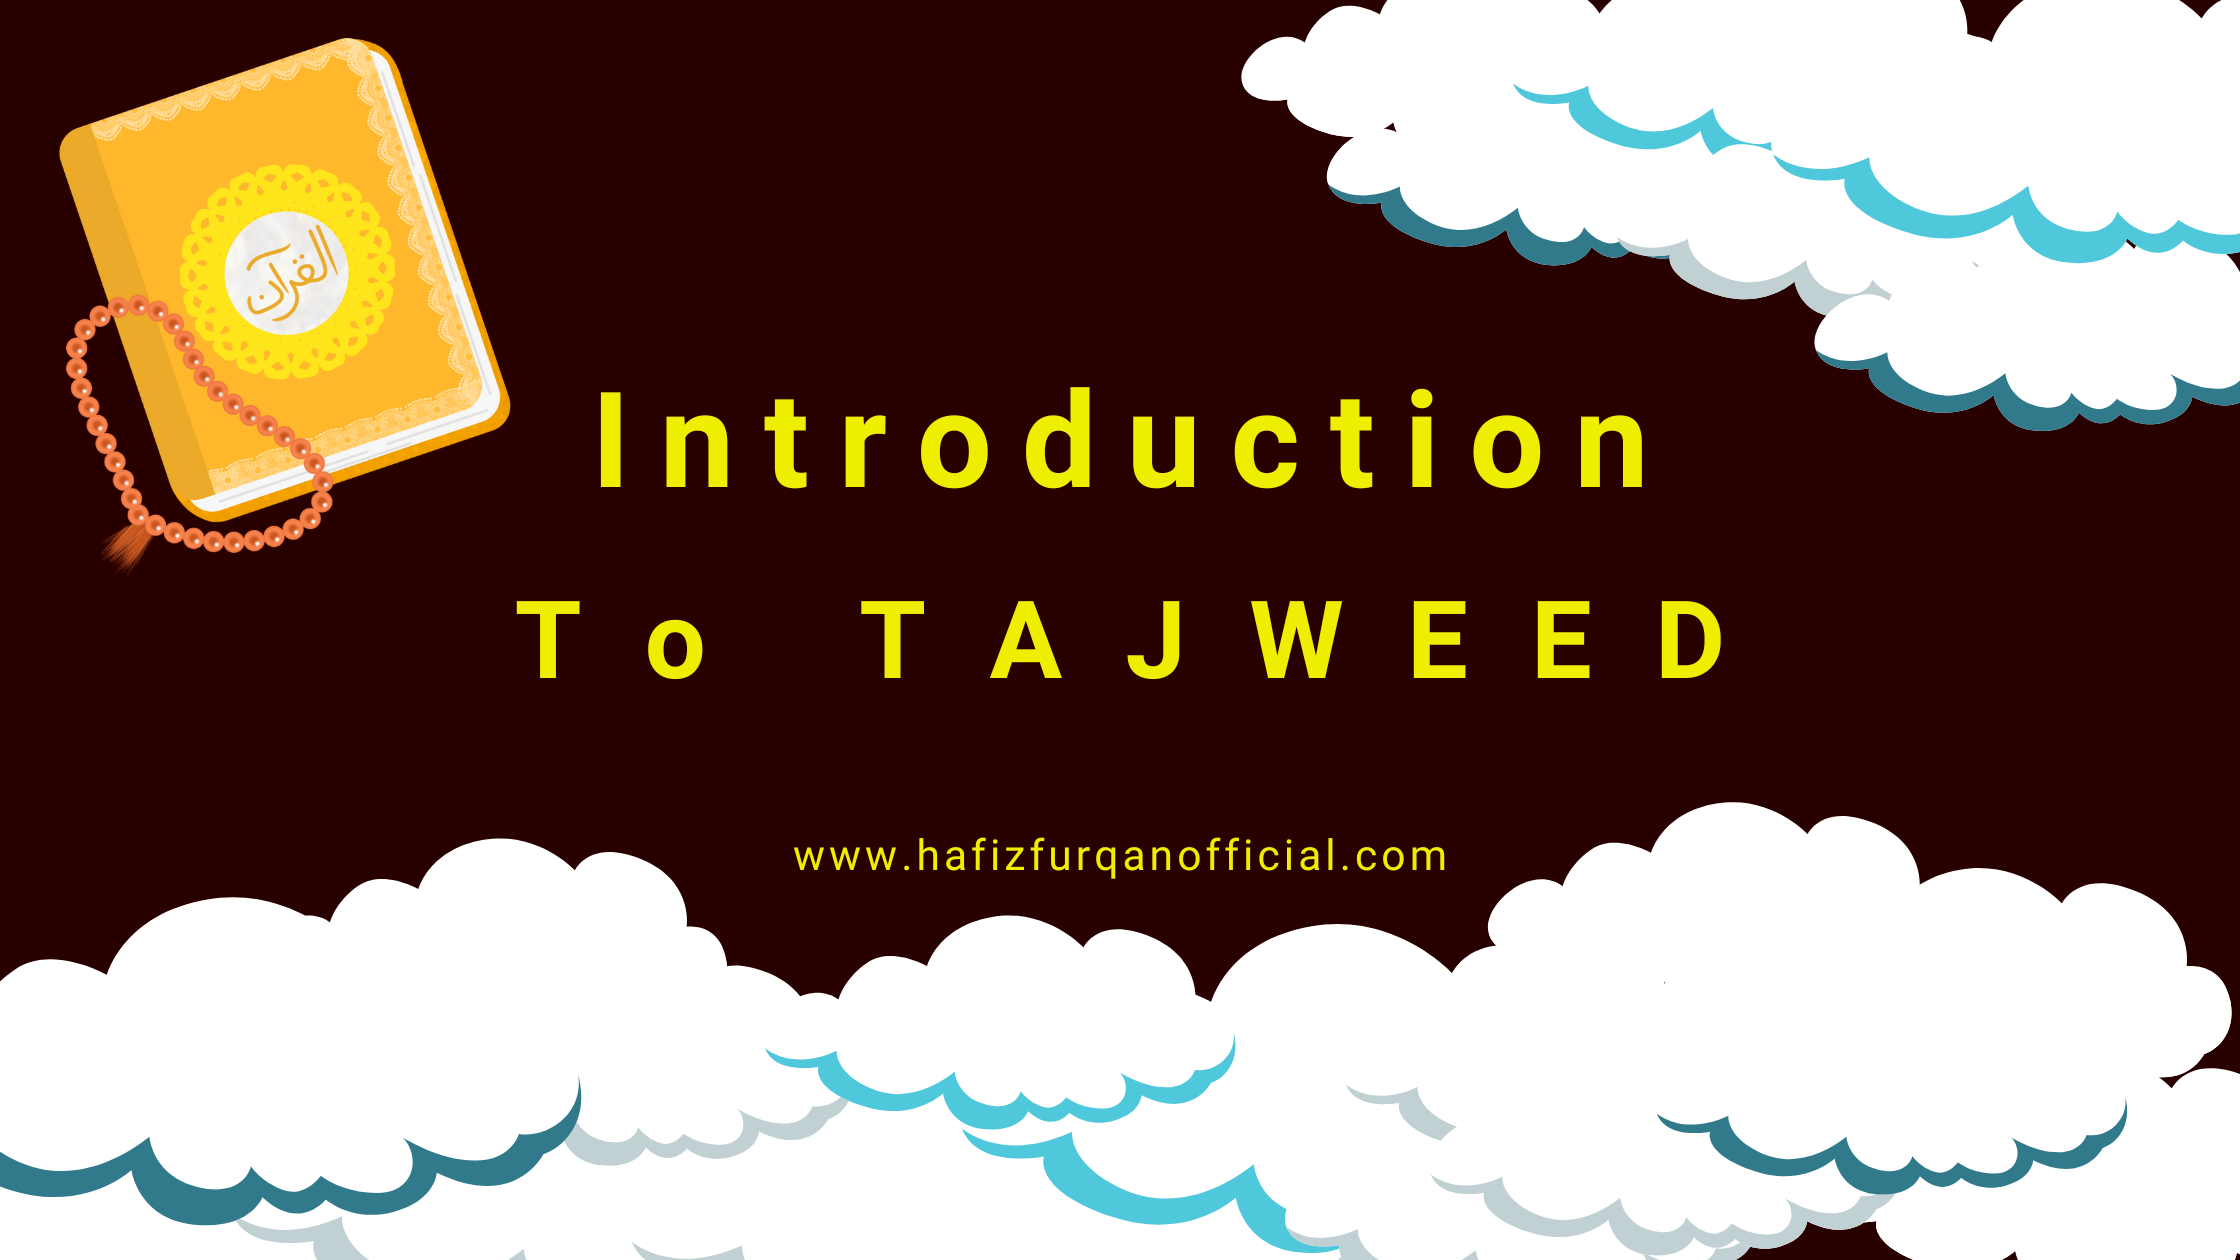 The Brief Introduction To Tajweed